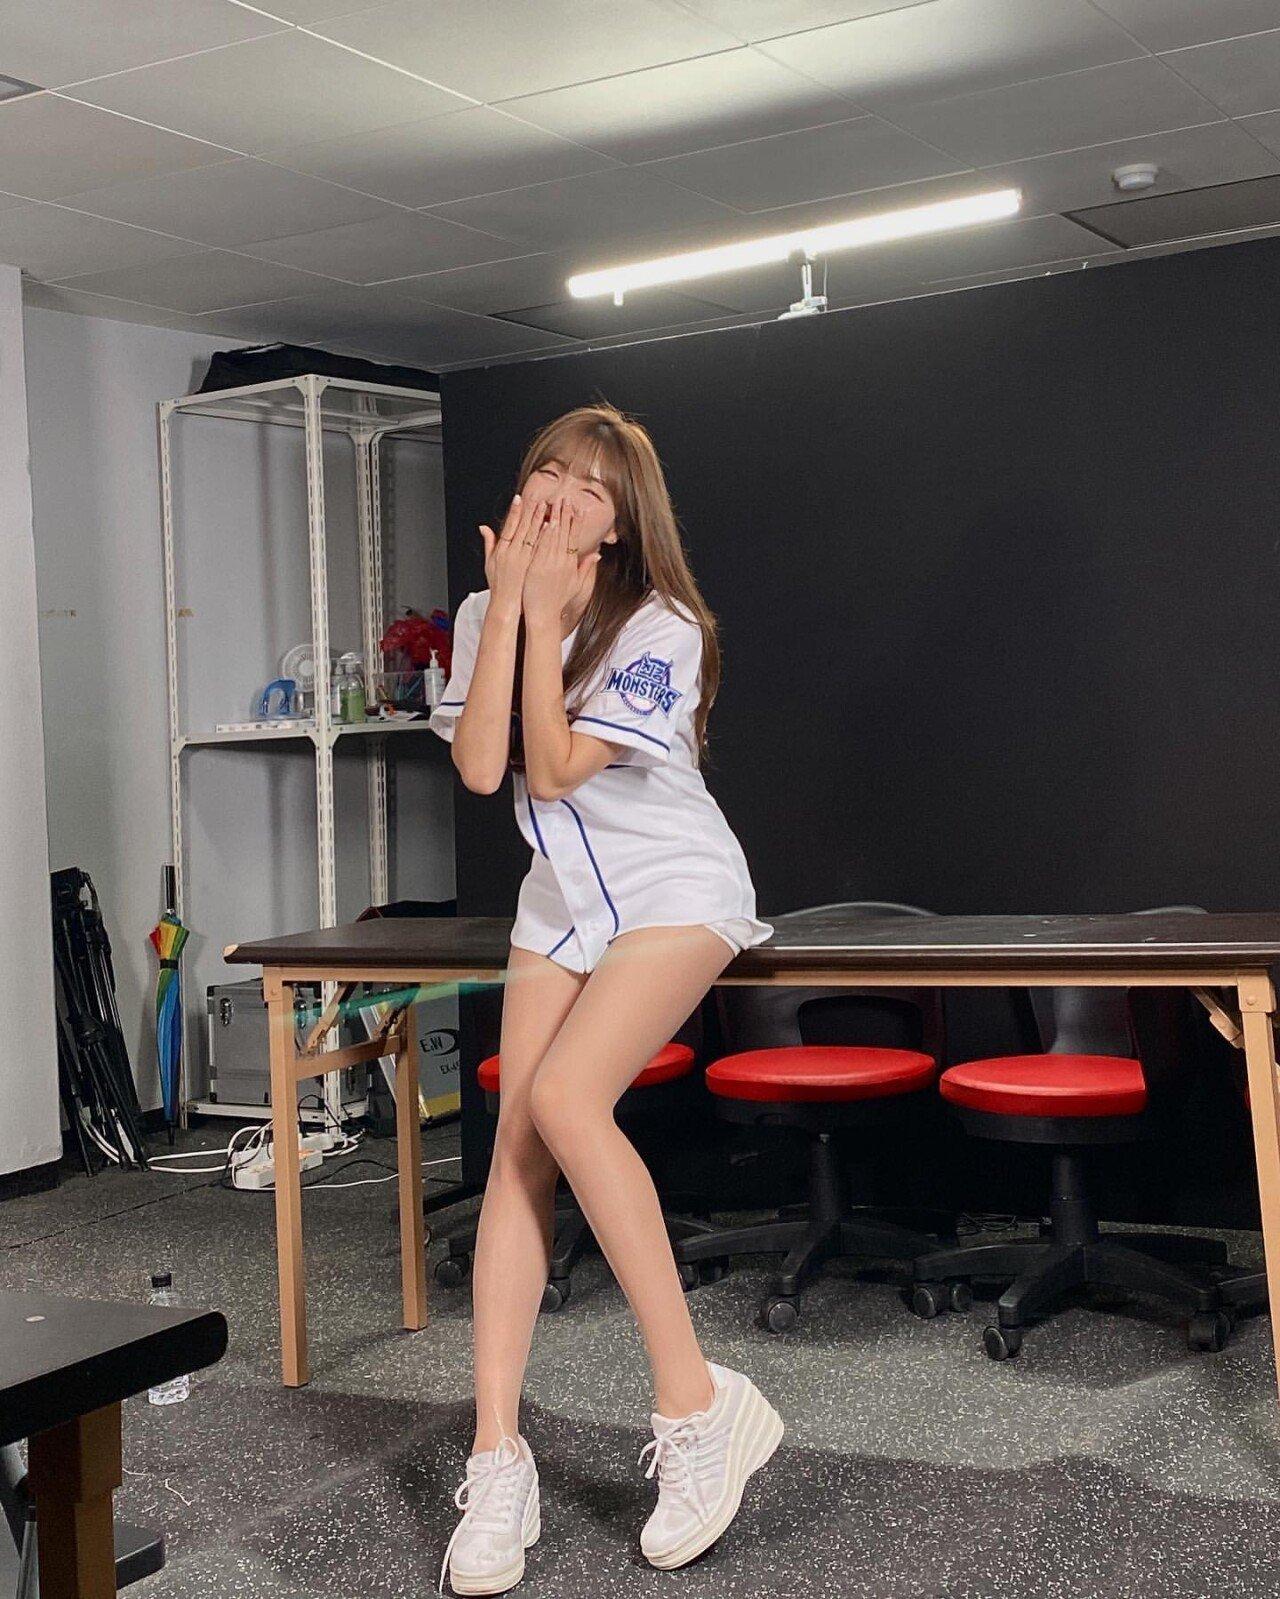 What's up with the cheerleader, Ahn Jihyun?